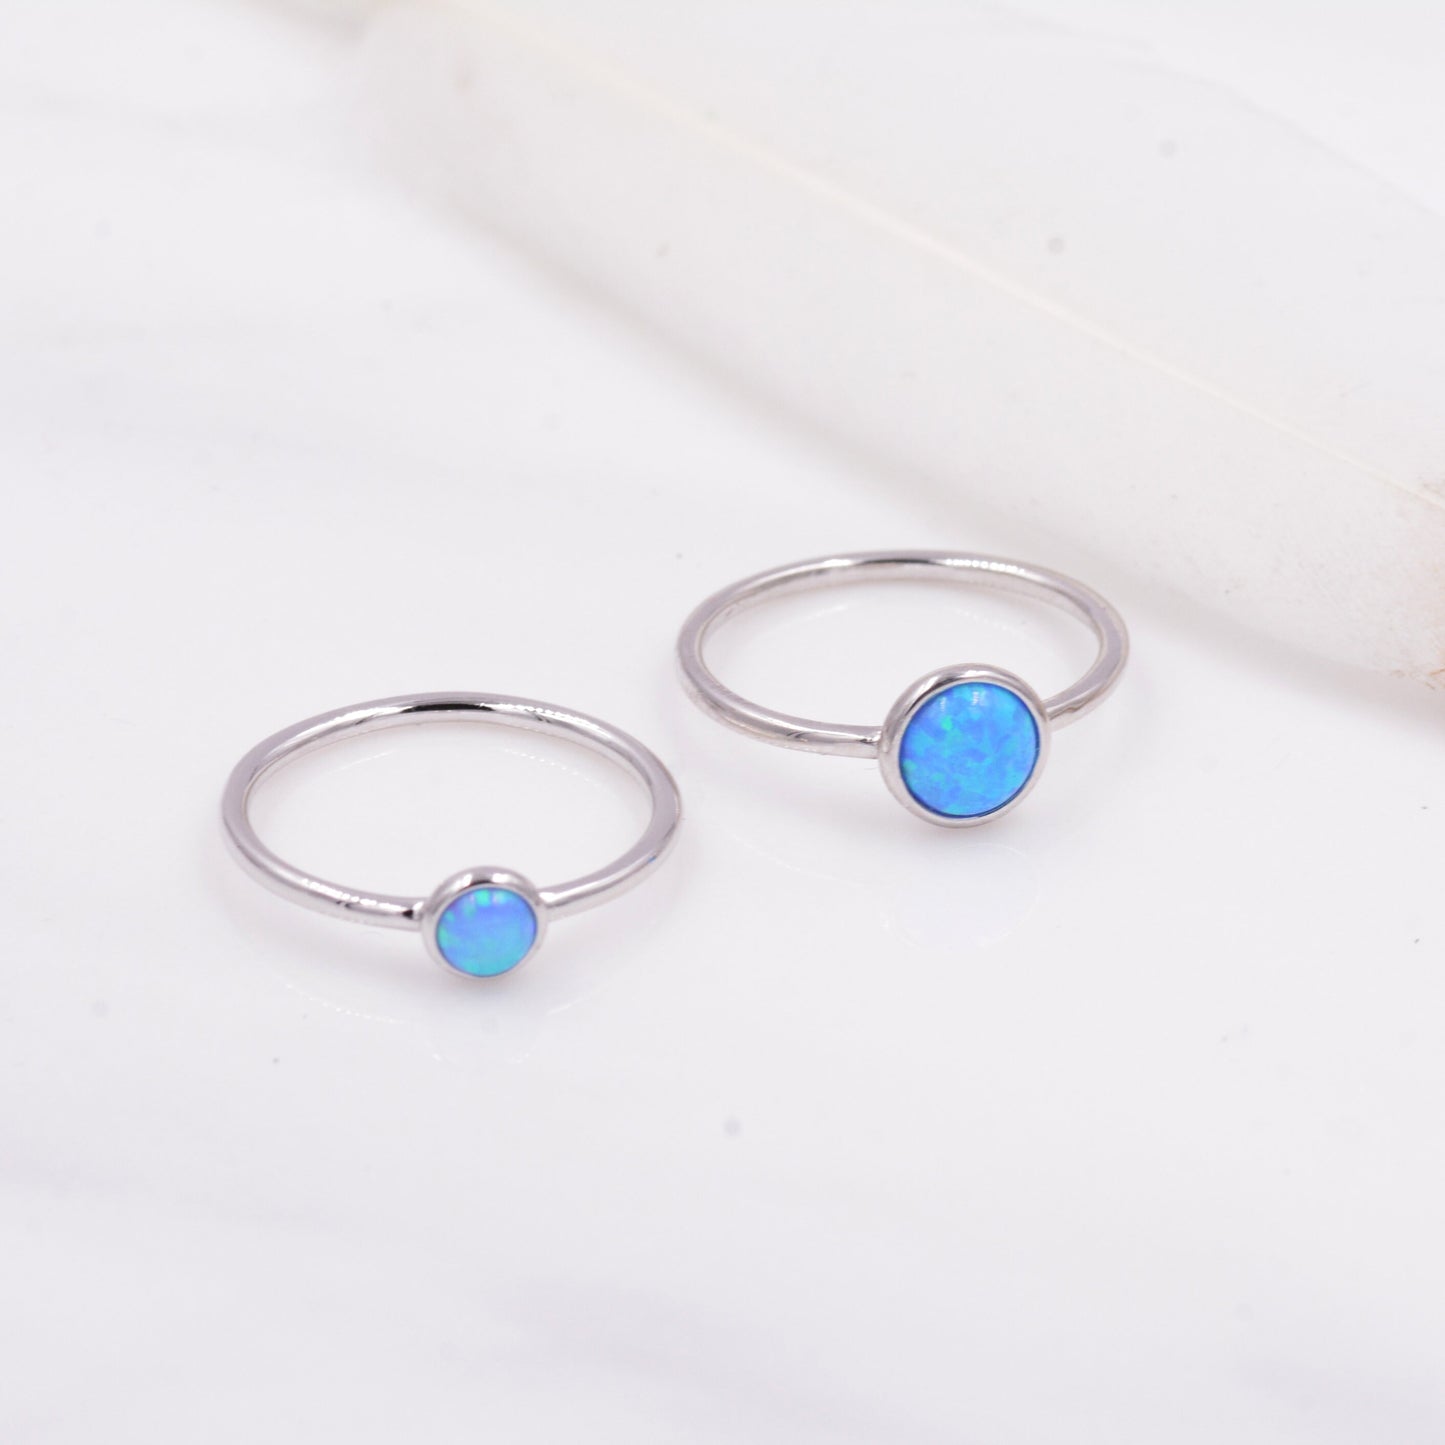 Sterling Silver Opal Ring,  US Size 6 7 8, Skinny Stacking Ring, Midi Ring, Minimalist Geometric Ring